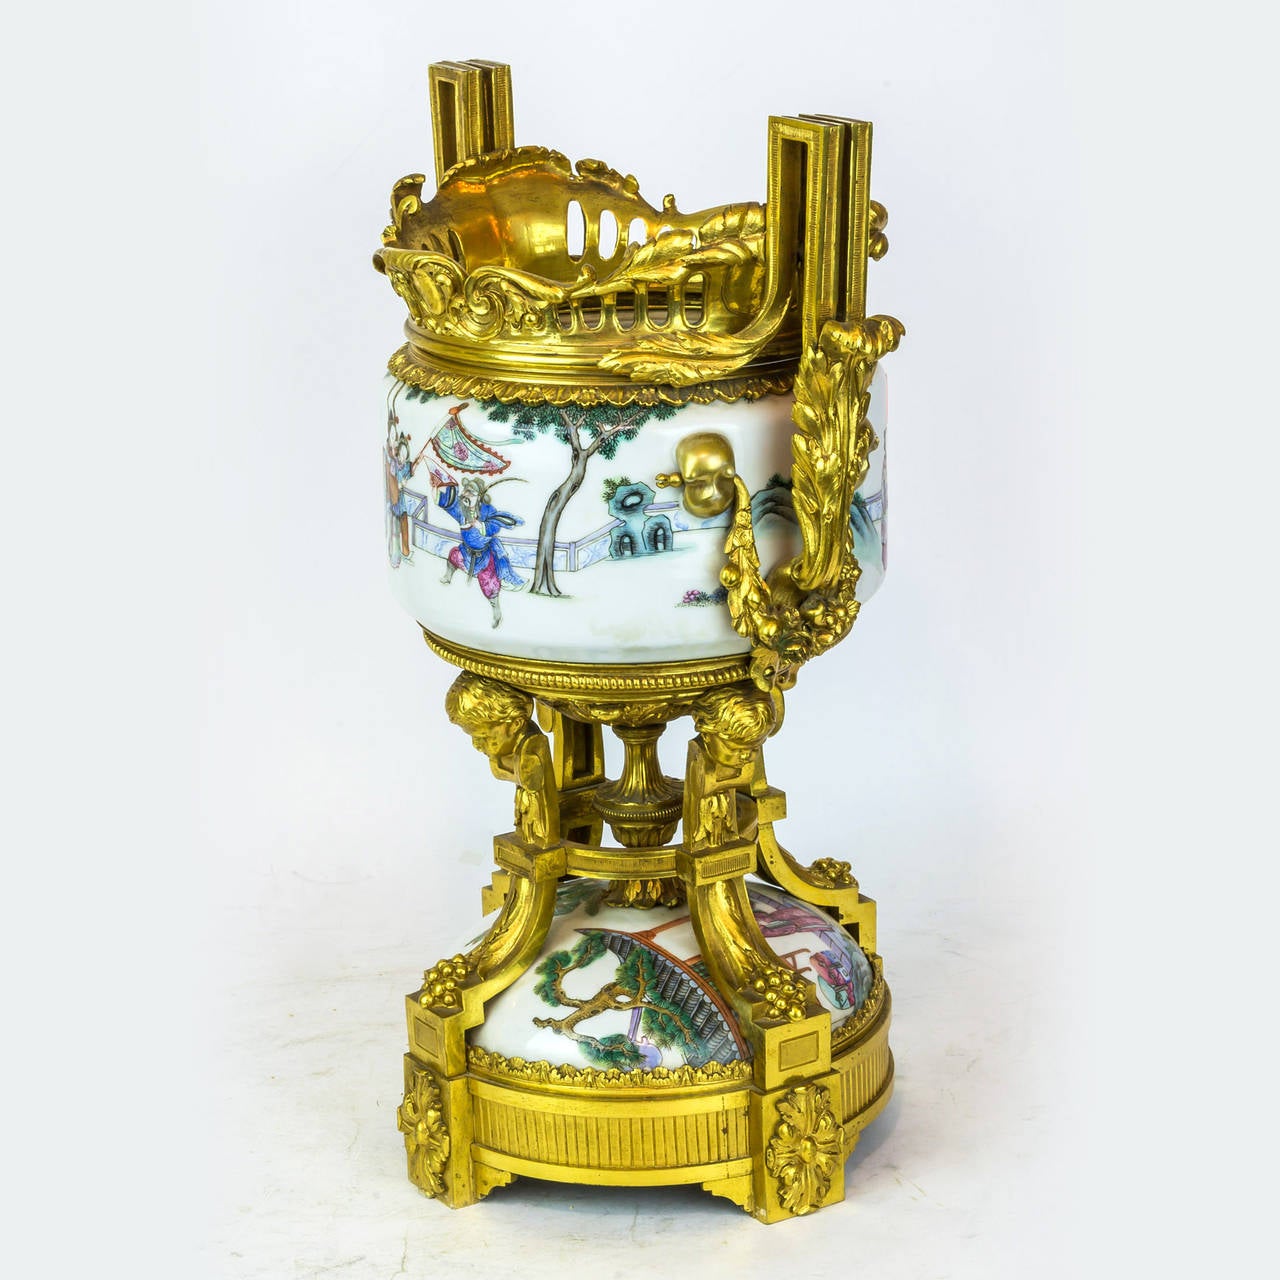 A Fine Bronze and Porcelain Footed Centerpiece with Chinese Porcelain